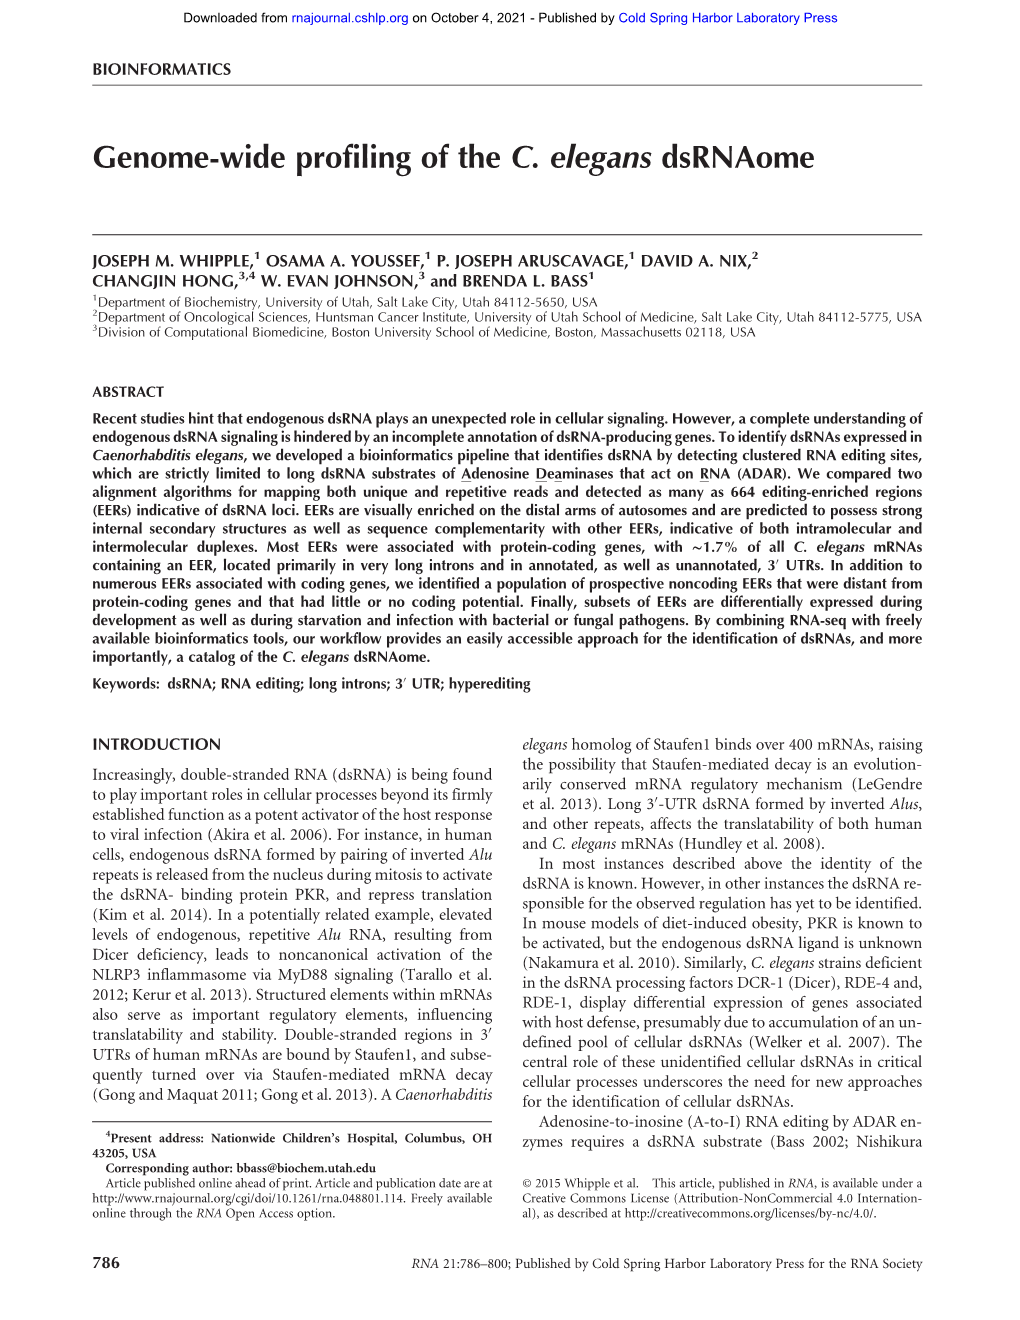 Genome-Wide Profiling of the C. Elegans Dsrnaome